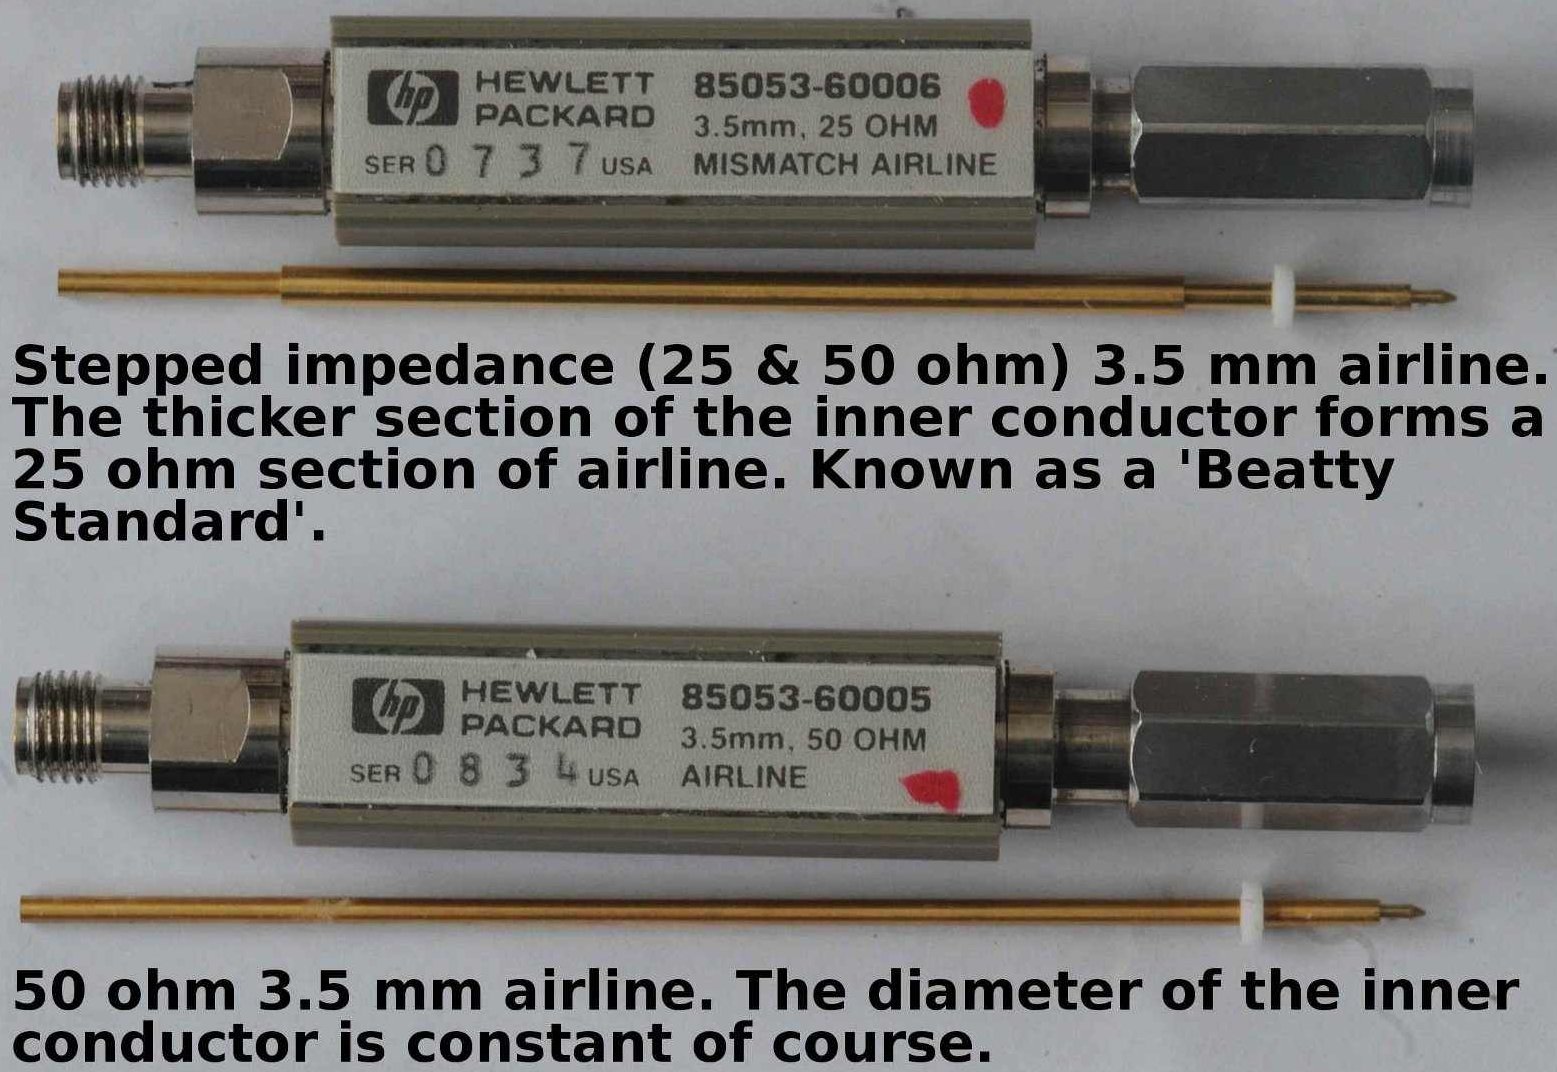 50 ohm and 25/50 ohm stepped impedance airline (Beatty Standard) used to verify calibration performance